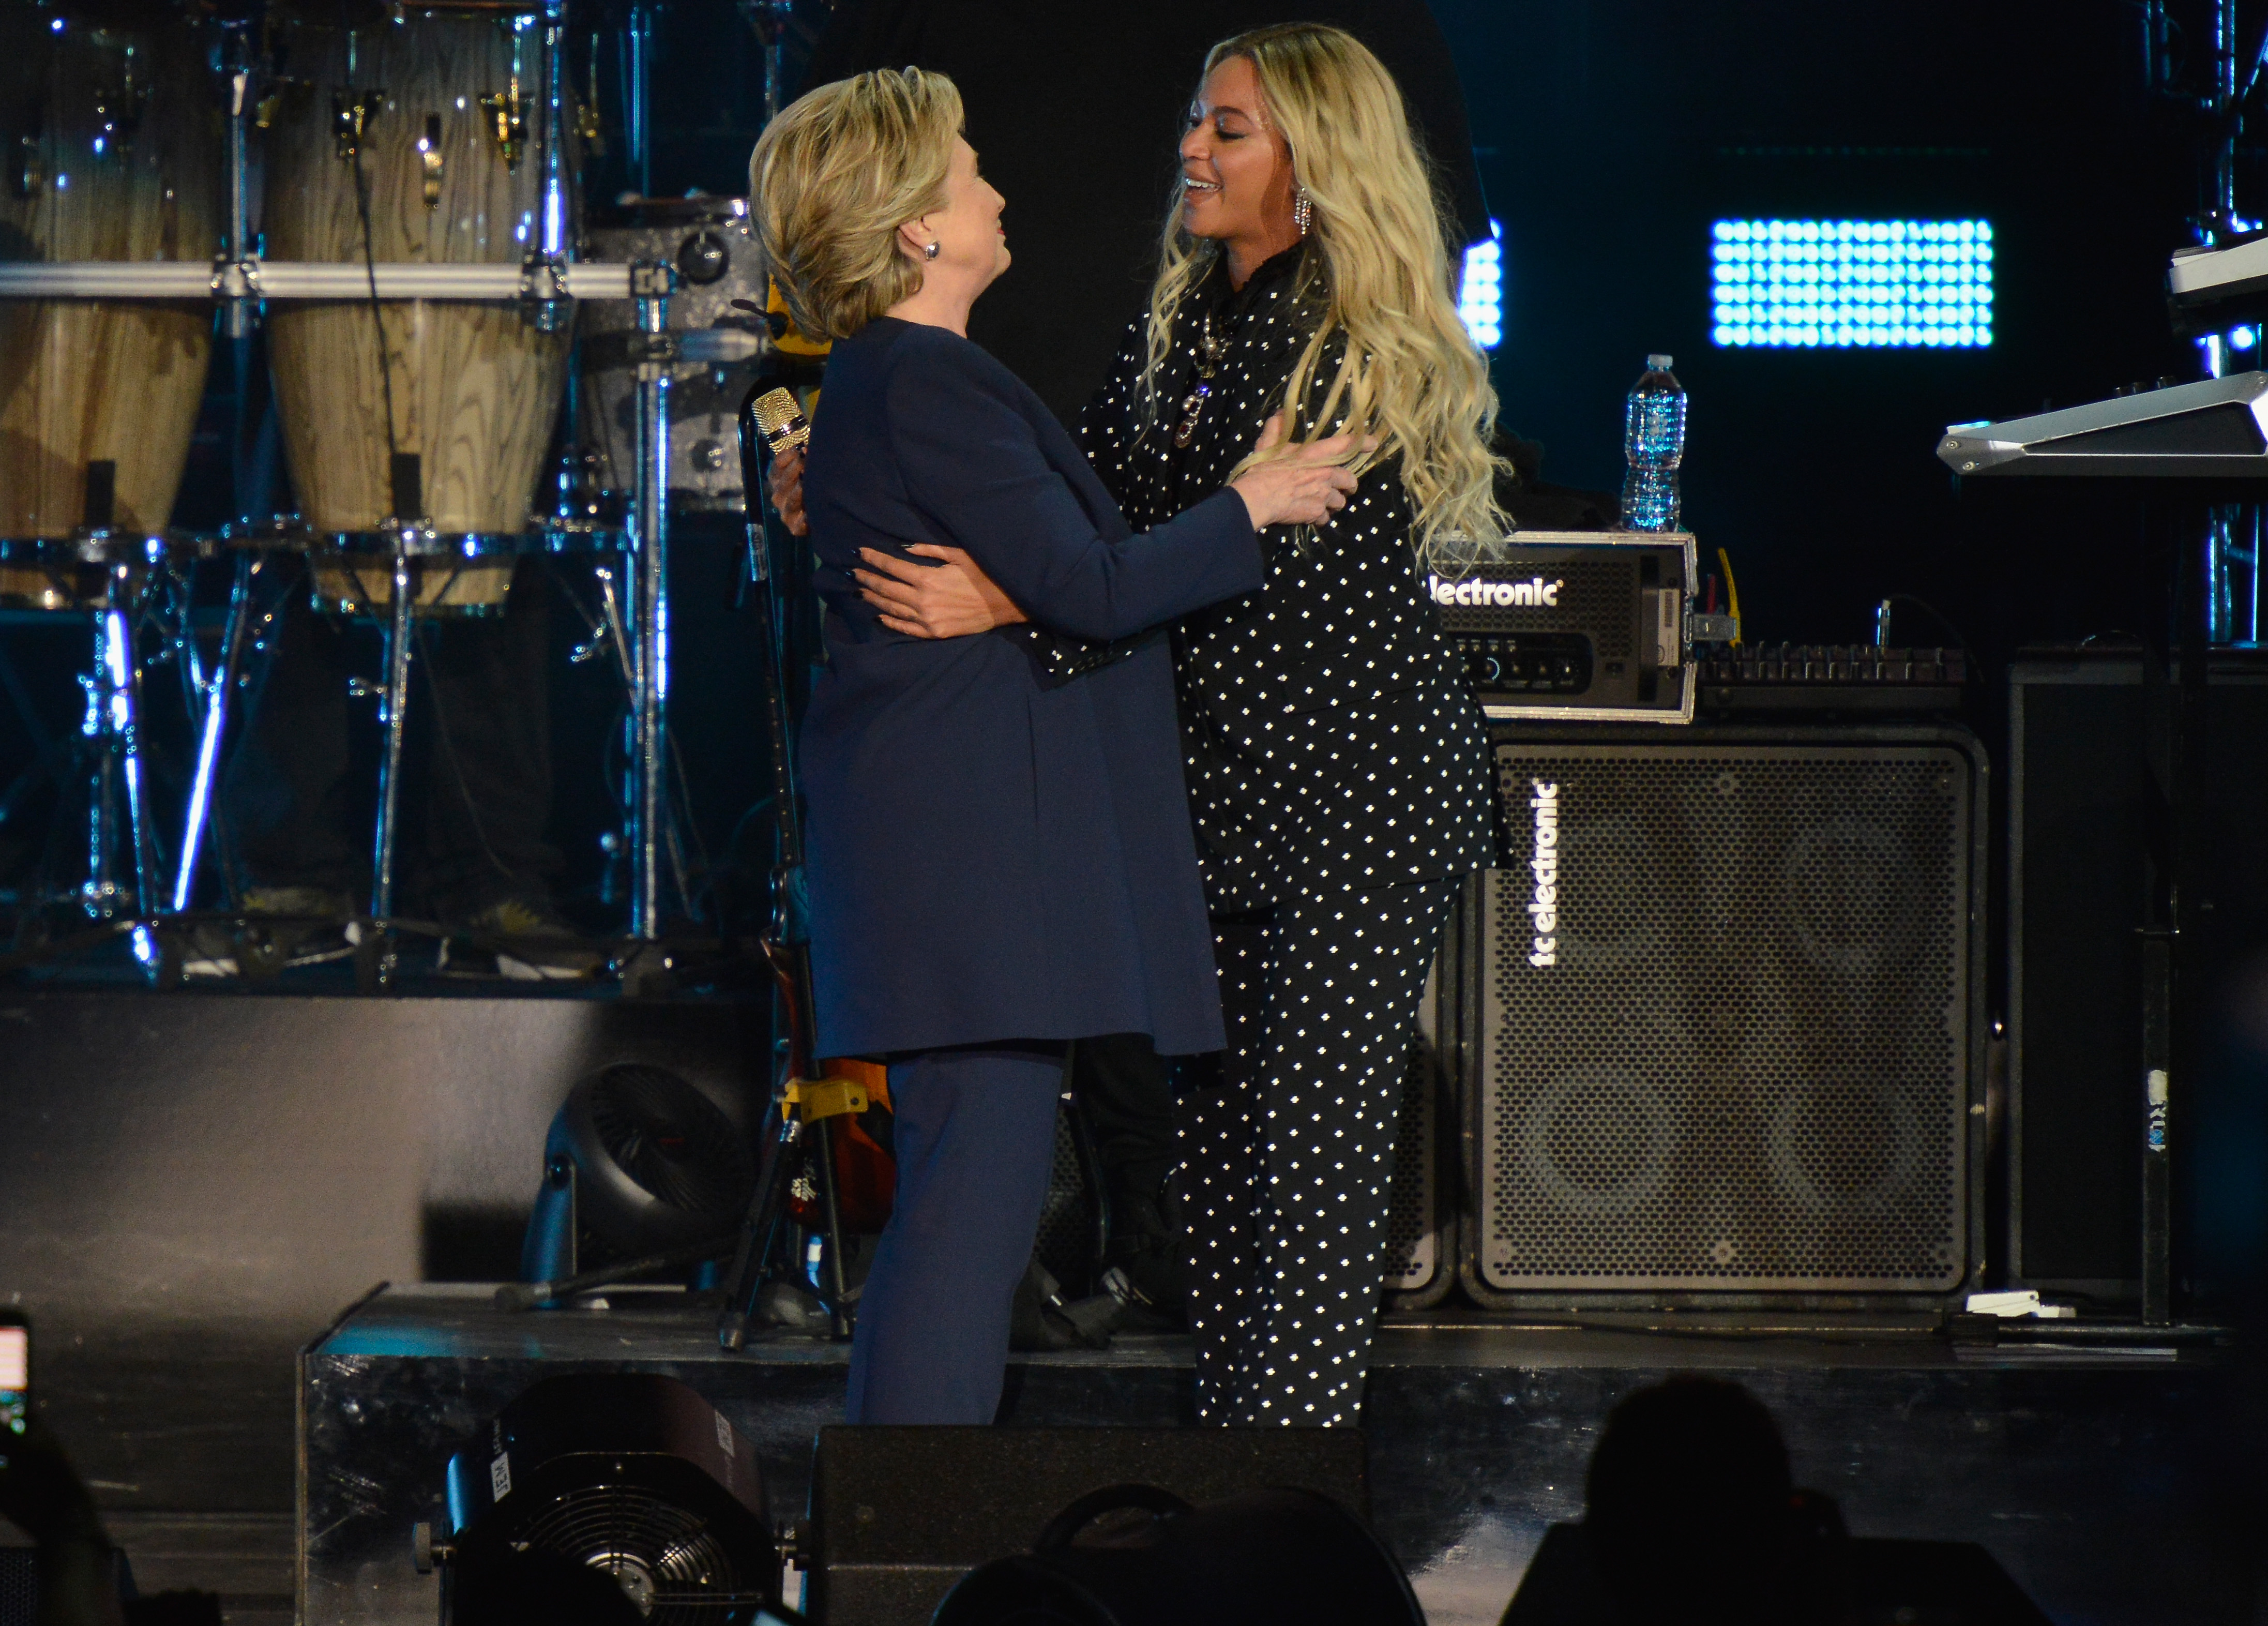 Beyoncé welcomes on stage Democratic presidential nominee former Secretary of State Hillary Clinton during a Get Out The Vote concert at Wolstein Center in Cleveland, Ohio on Nov. 4, 2016. (Duane Prokop/Getty Images)